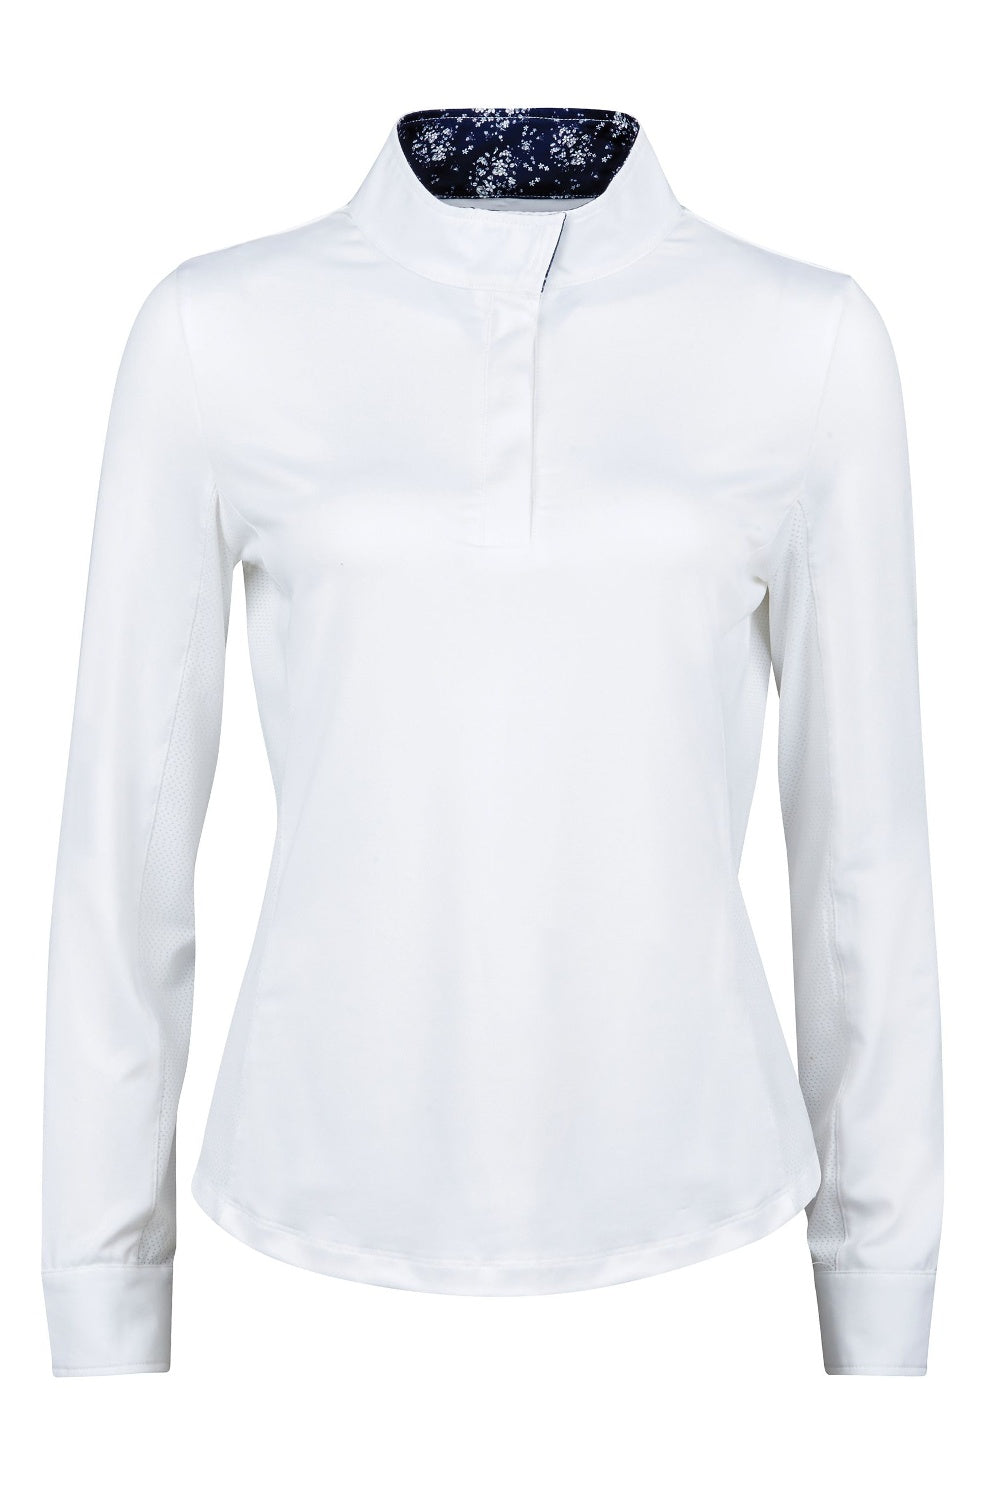 Dublin Ria Long Sleeve Competition Shirt in White/Navy